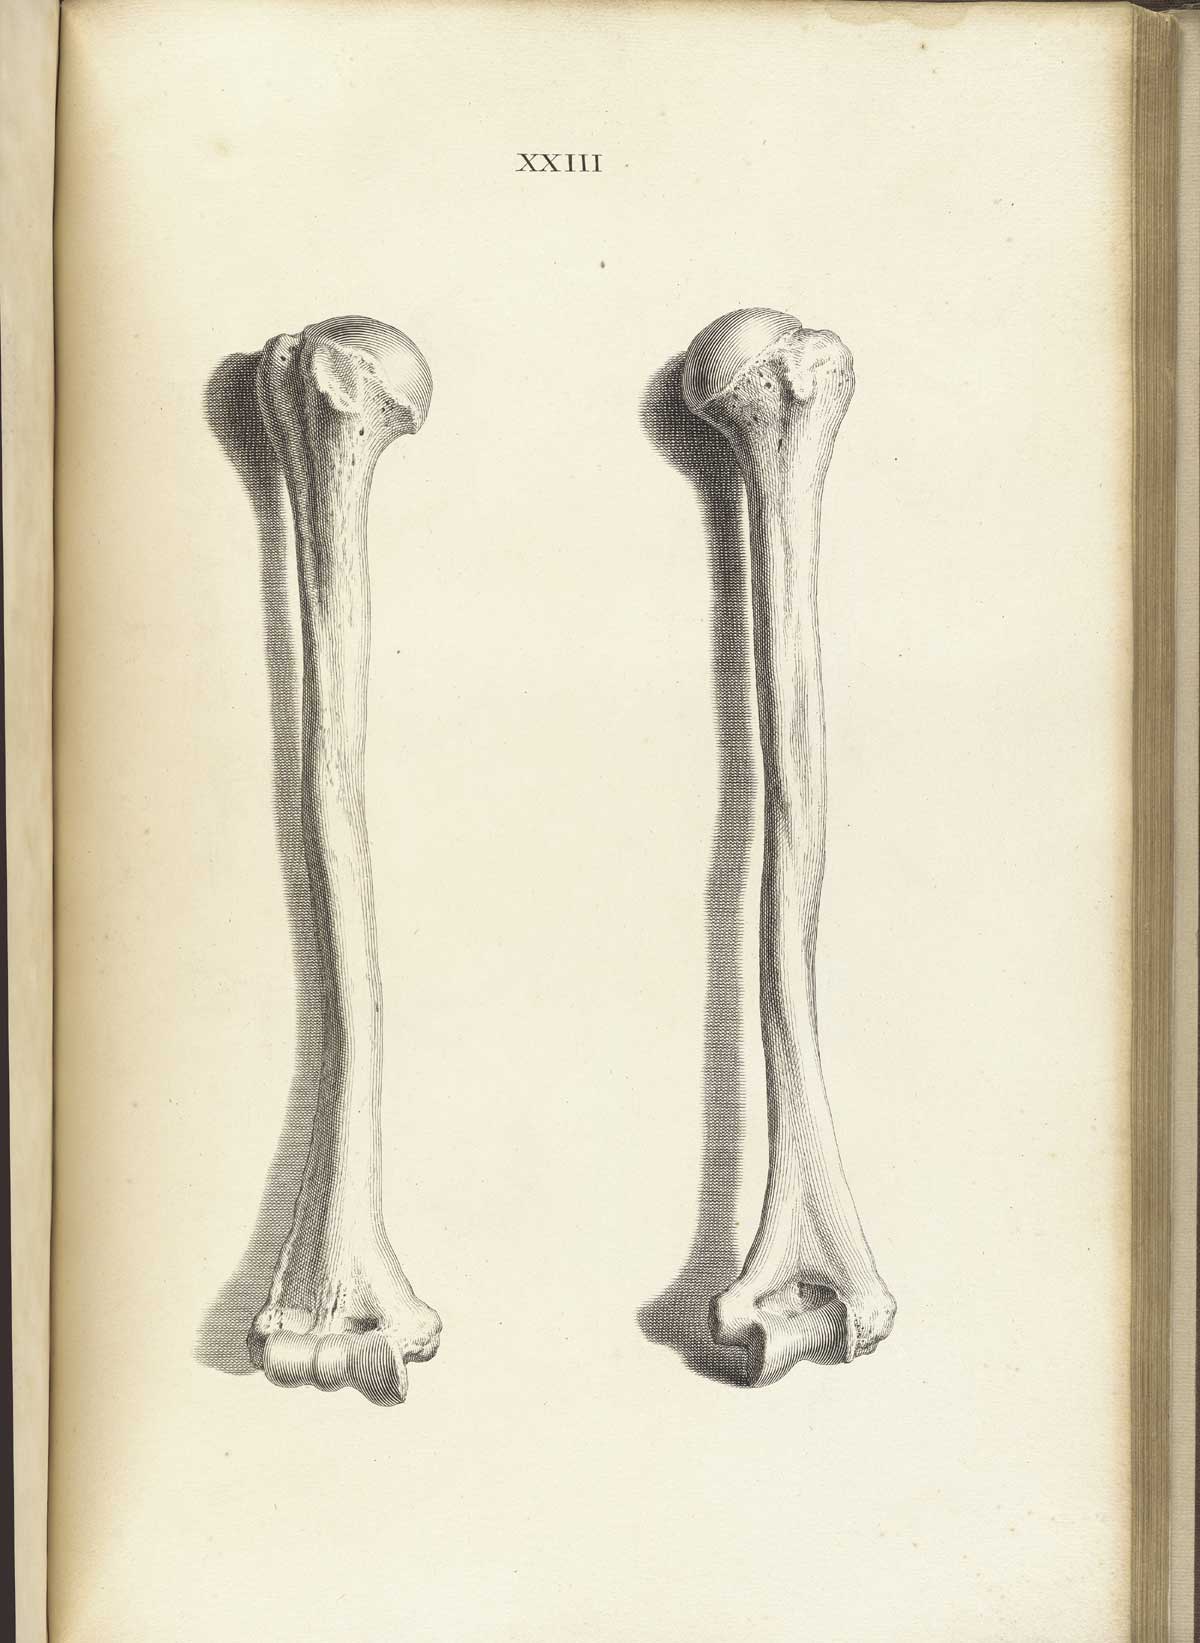 Engraving of two humerus bones standing vertically side by side, showing the anterior and posterior views, from William Cheselden’s Osteographia, NLM Call no.: WZ 260 C499o 1733.